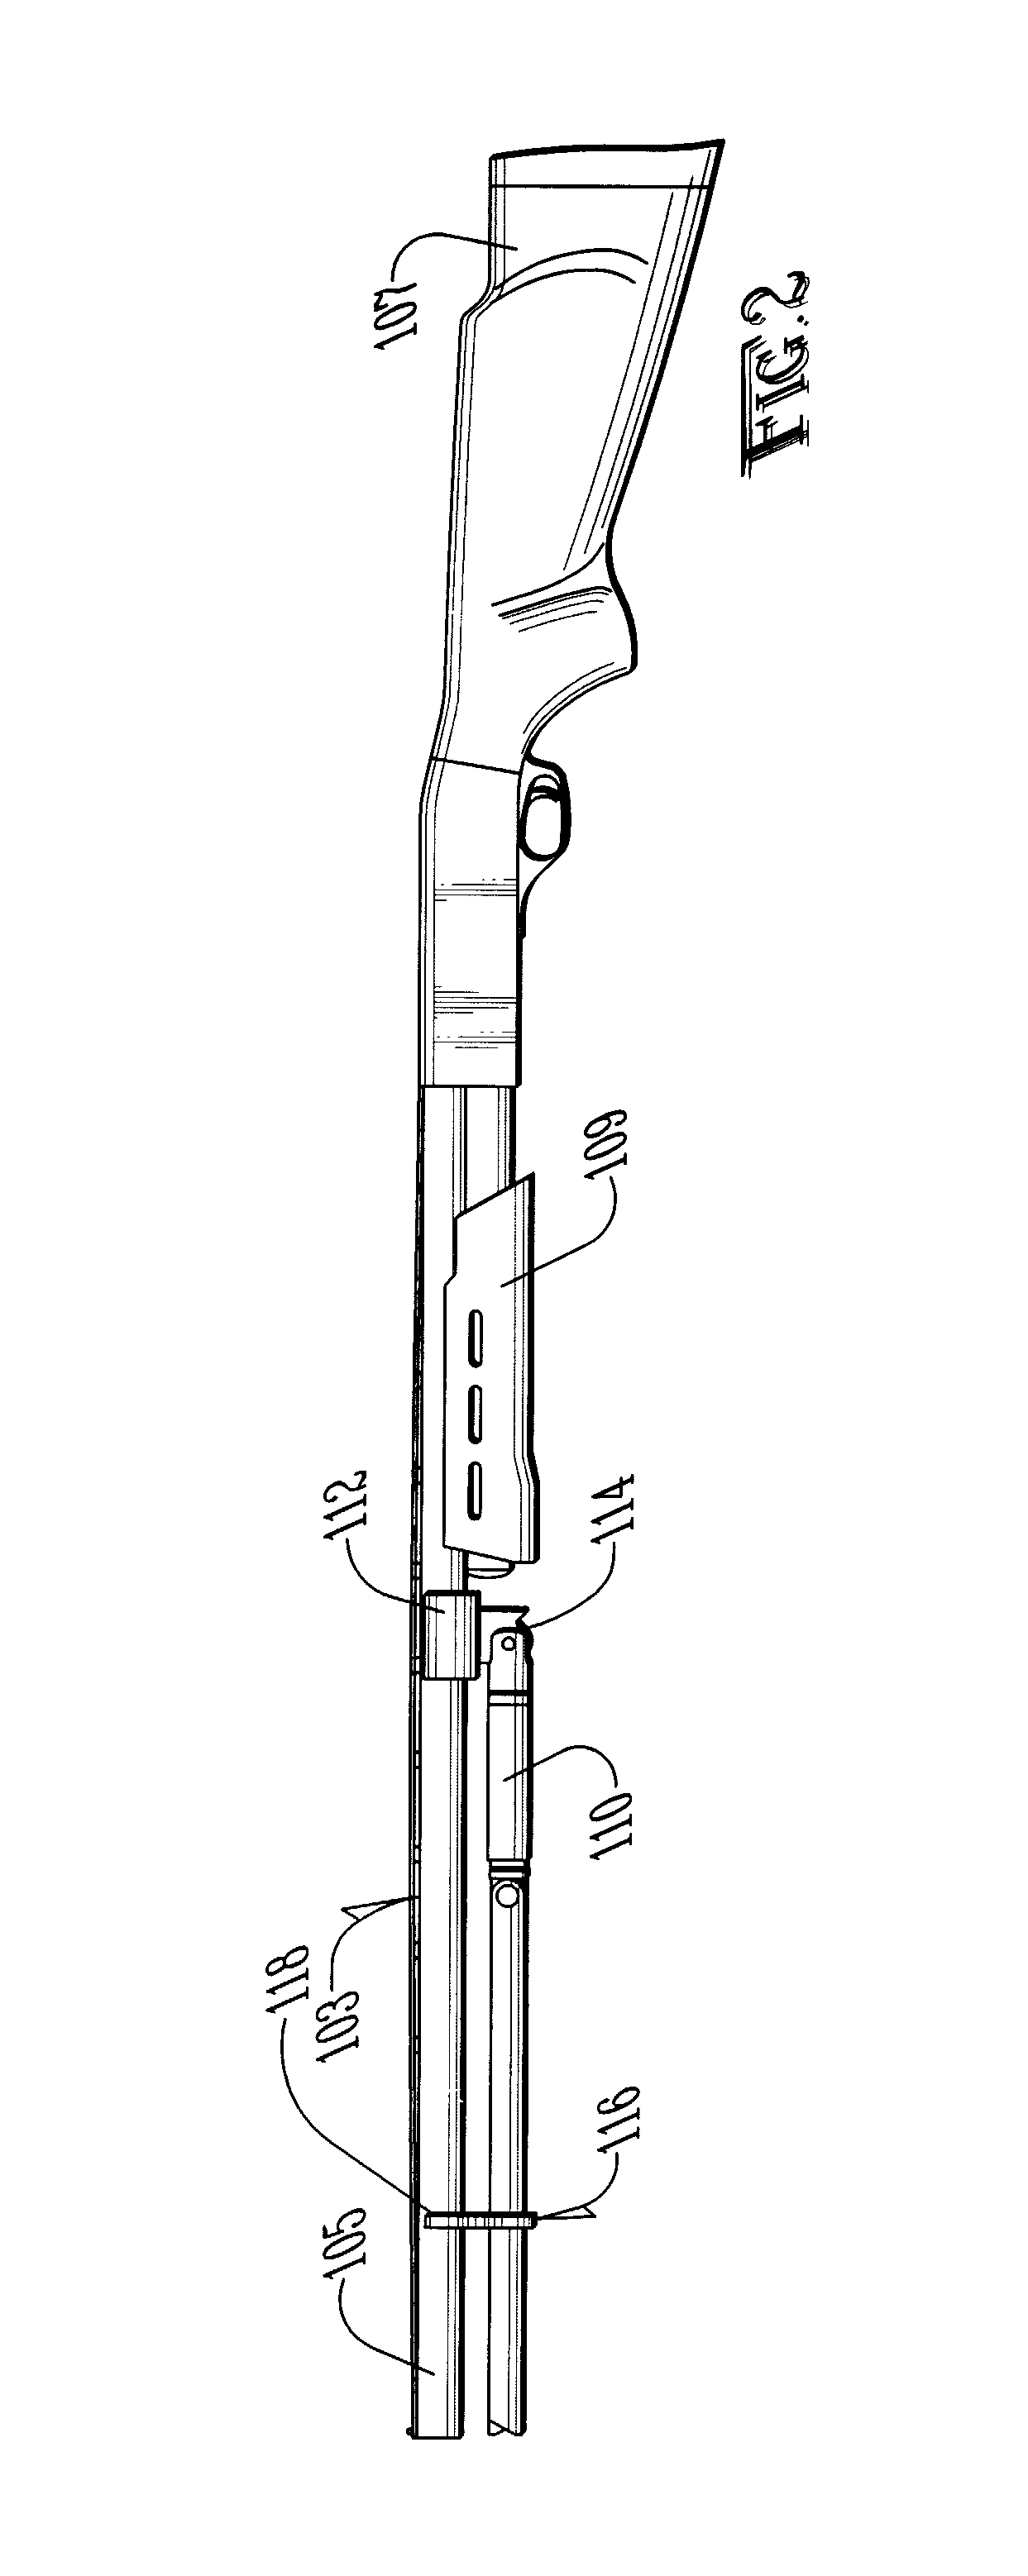 Method and apparatus for supporting a shotgun